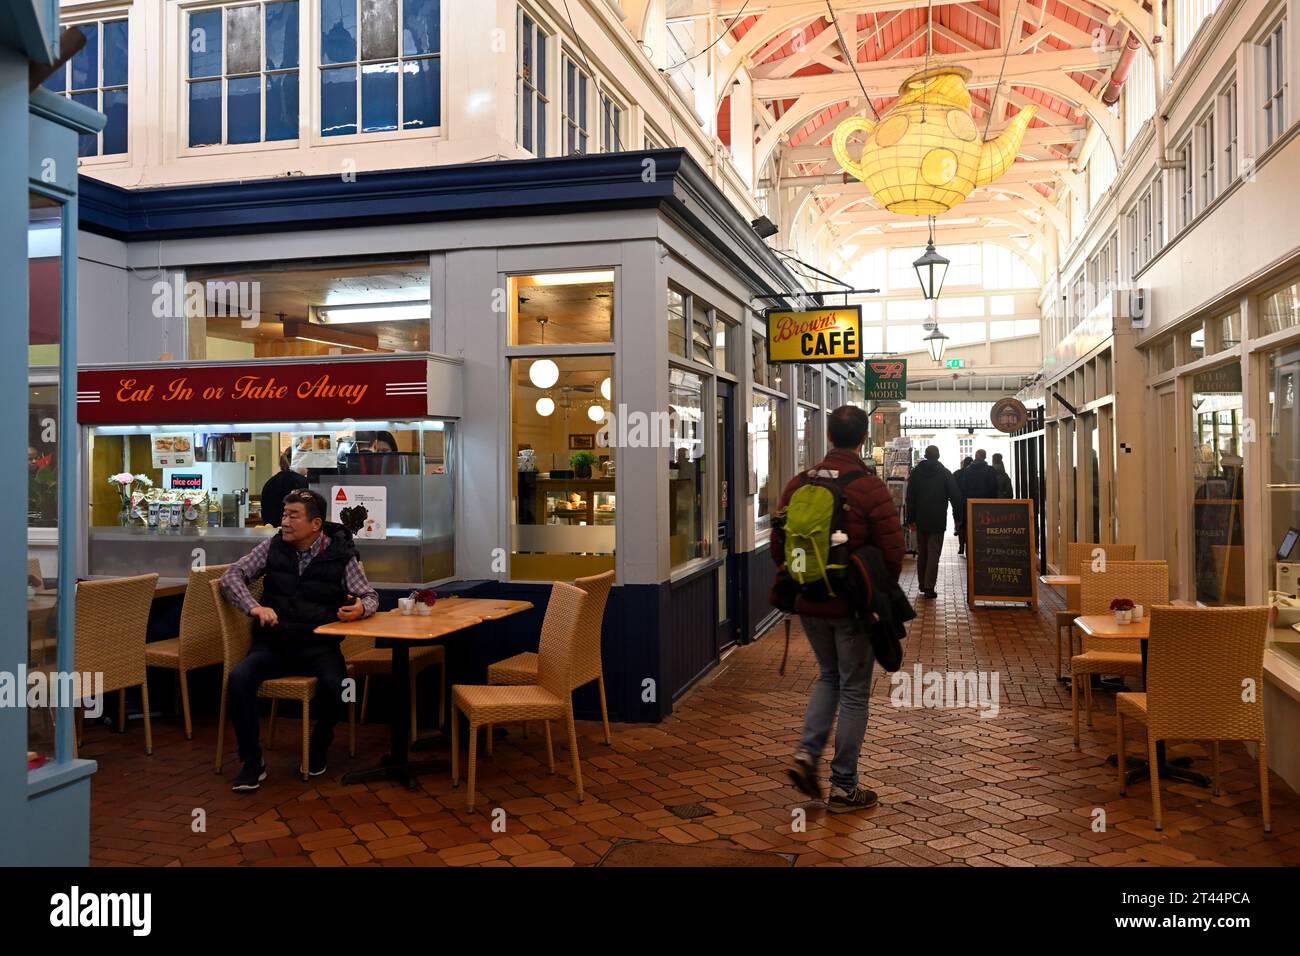 Inside the legendary Oxford indoor covered market with one of multiple cafes, UK Stock Photo